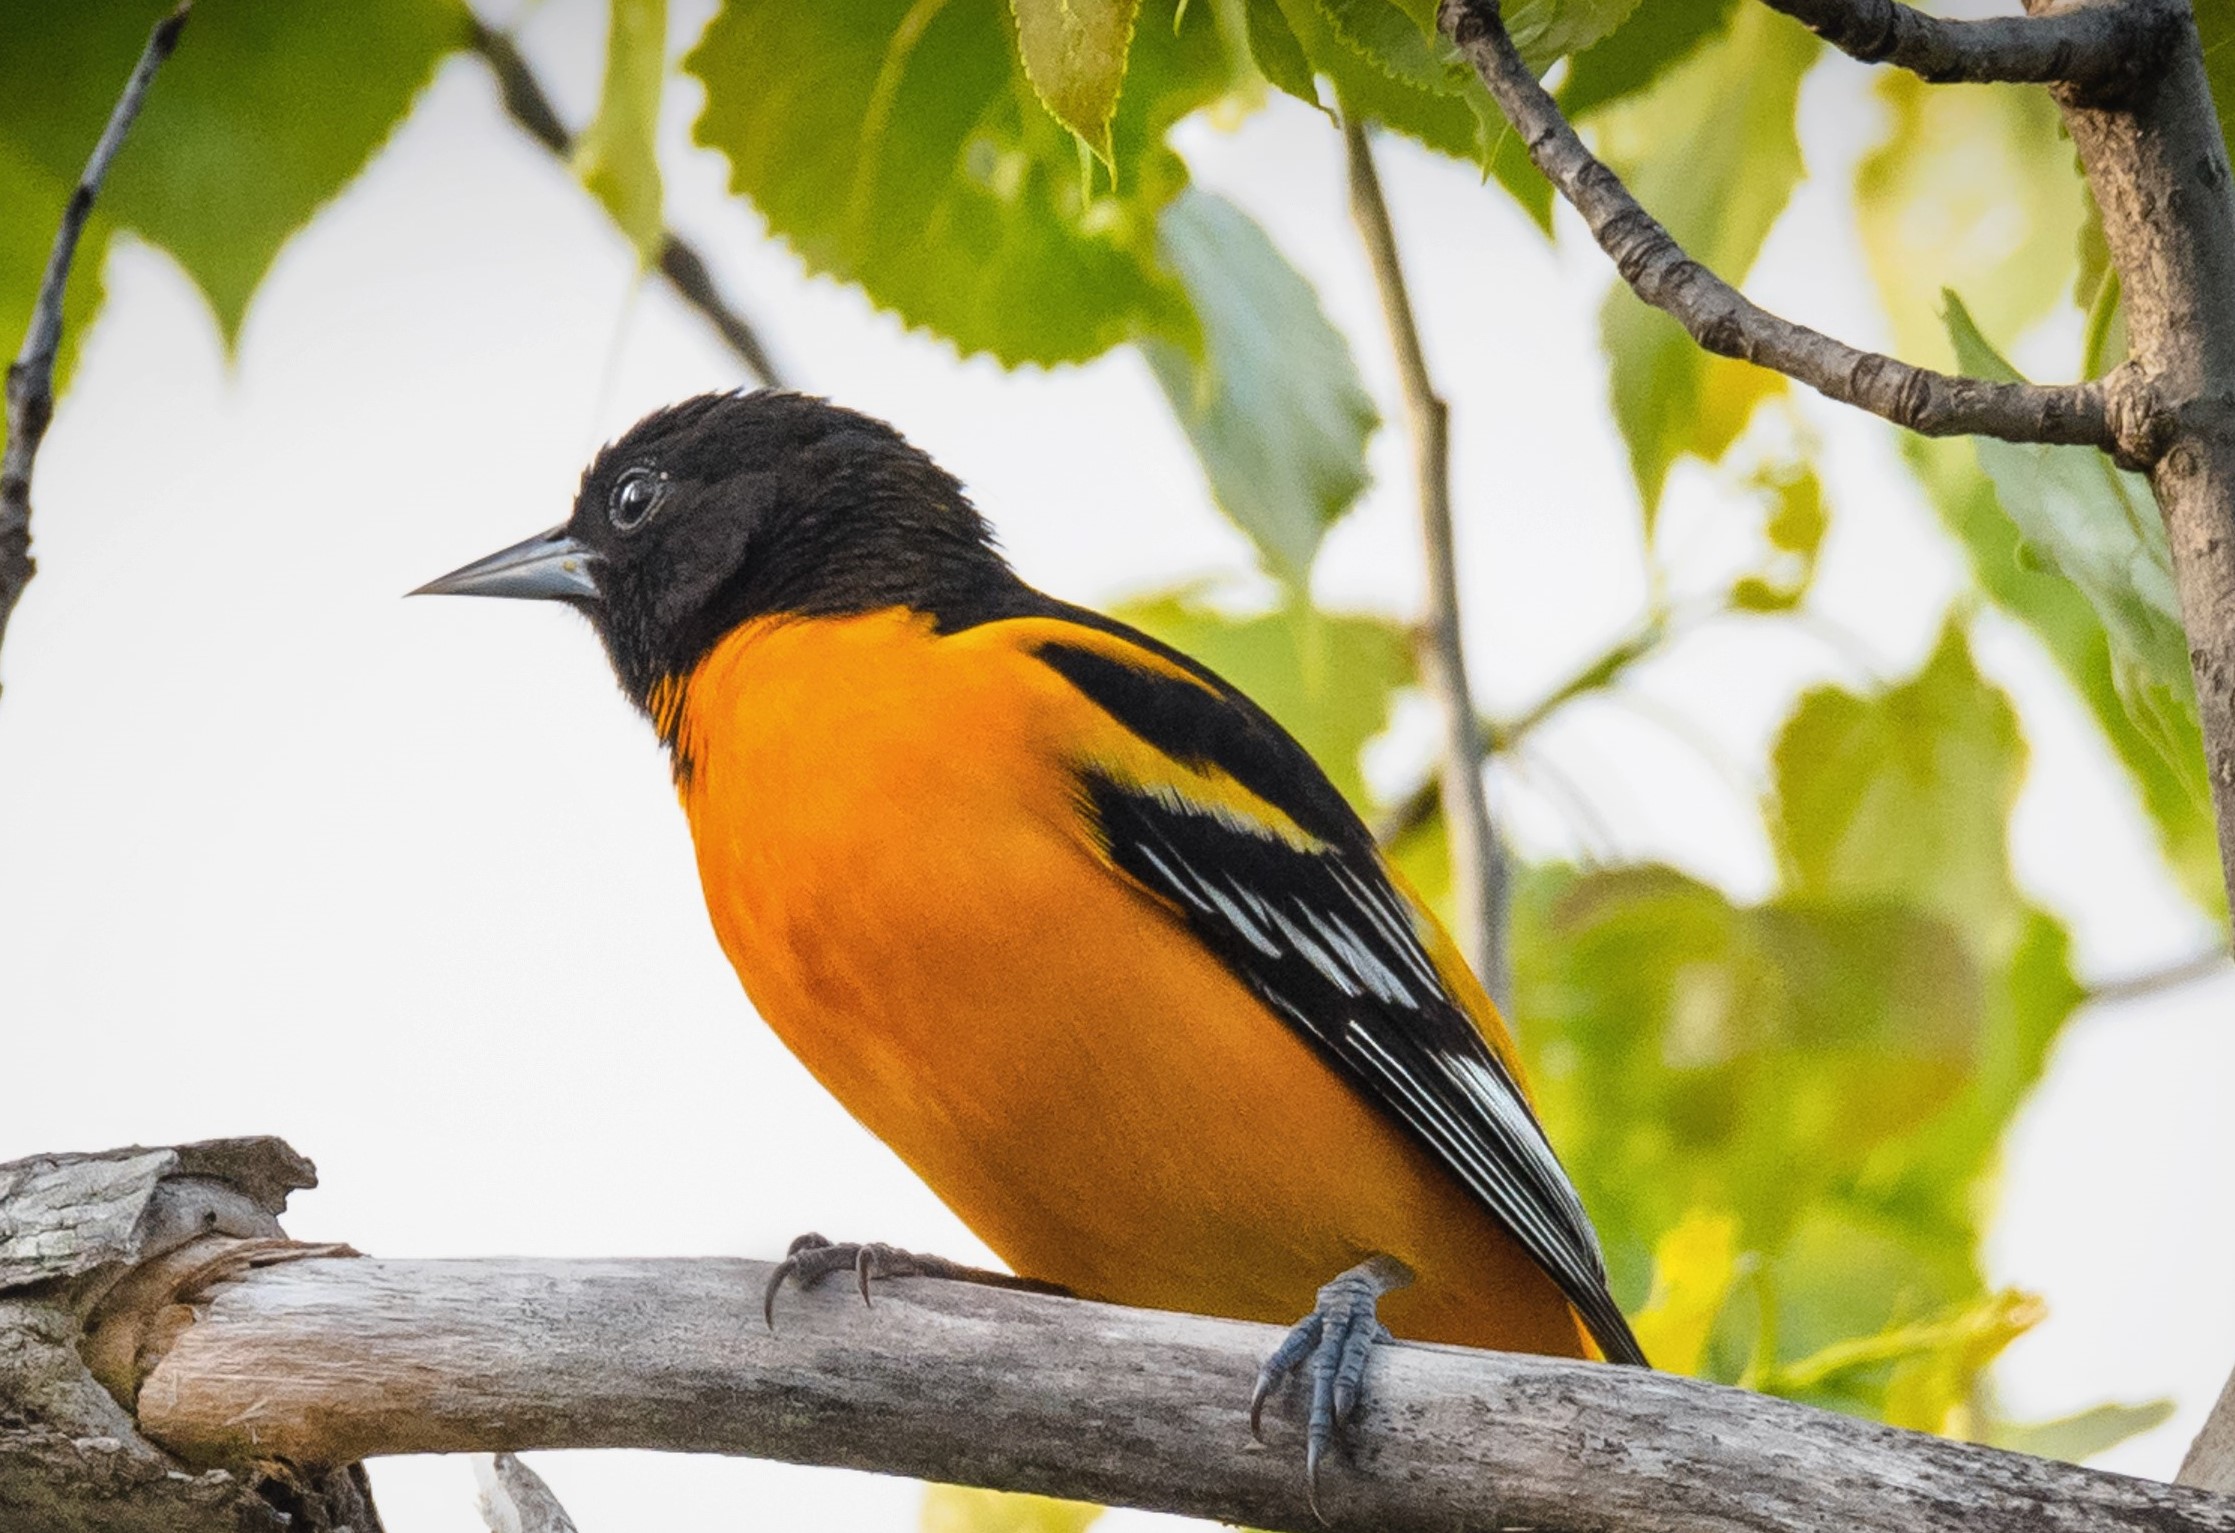 An oriole with an orange body and black wings and head sits on a tree branch.